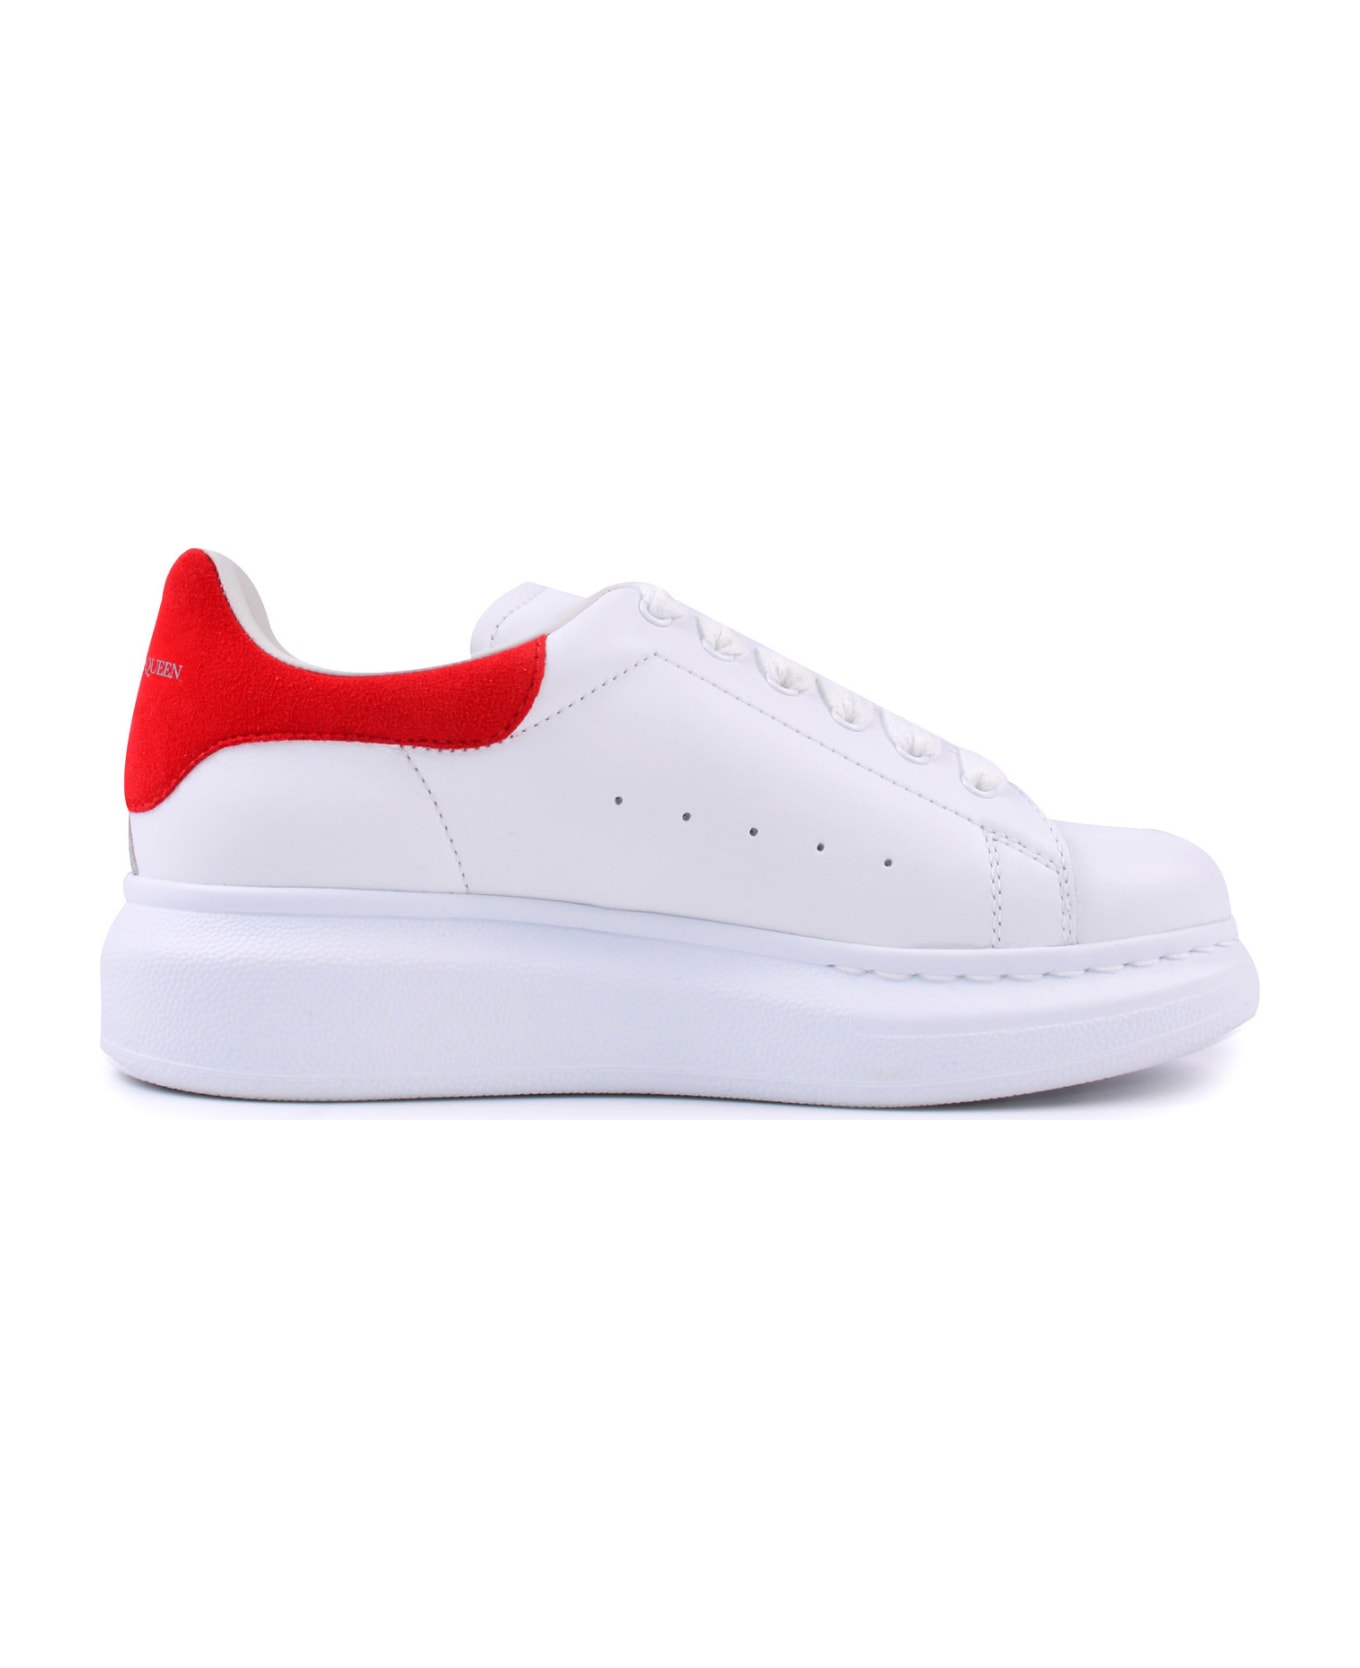 Alexander McQueen Leather Sneakers - White